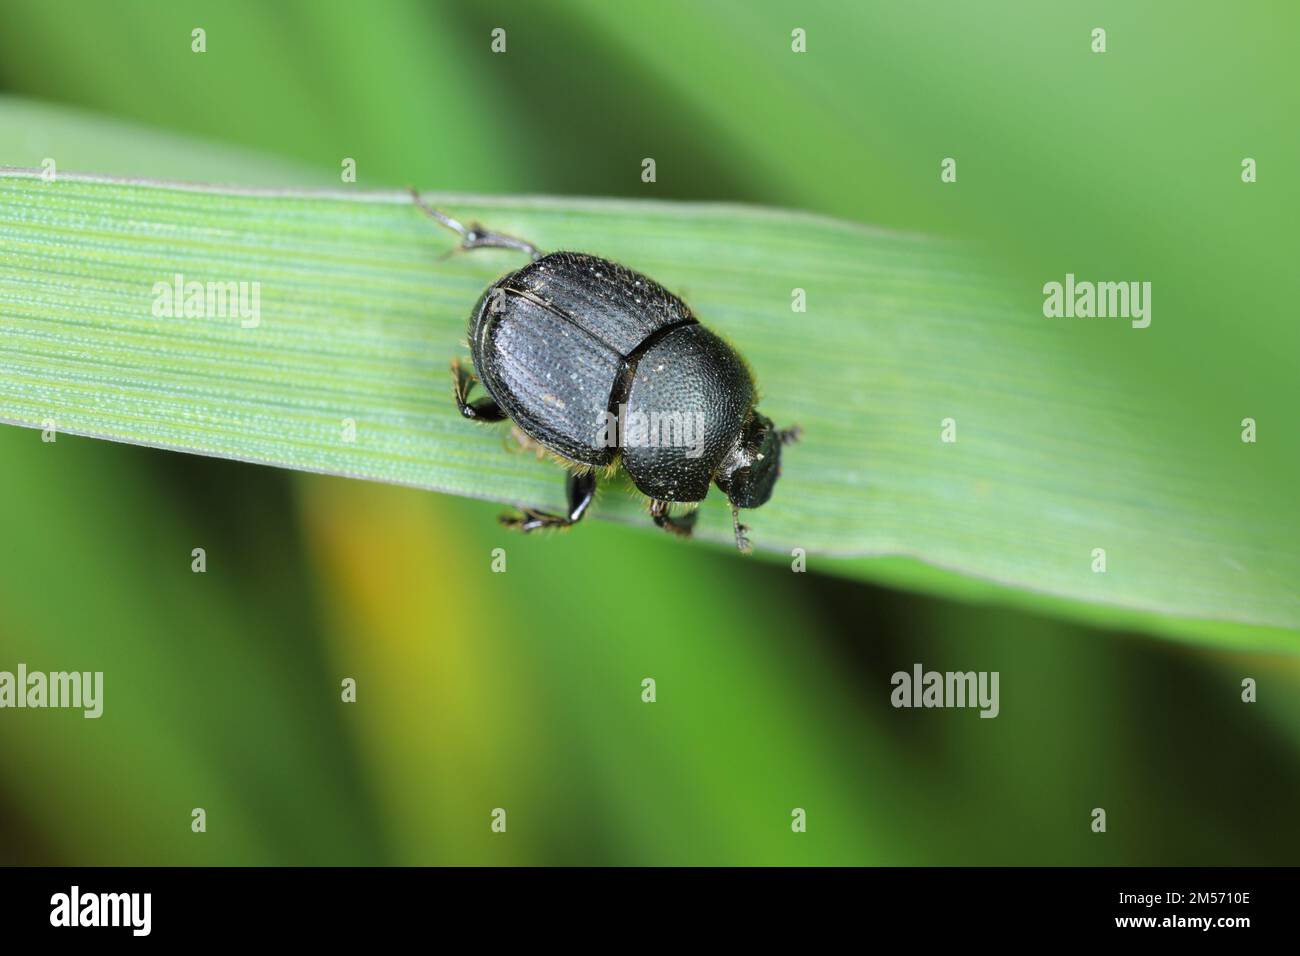 Onthophagus - dung beetle. Small dung beetle in the family Scarabaeidae. These insects feed on animal excrement. Stock Photo